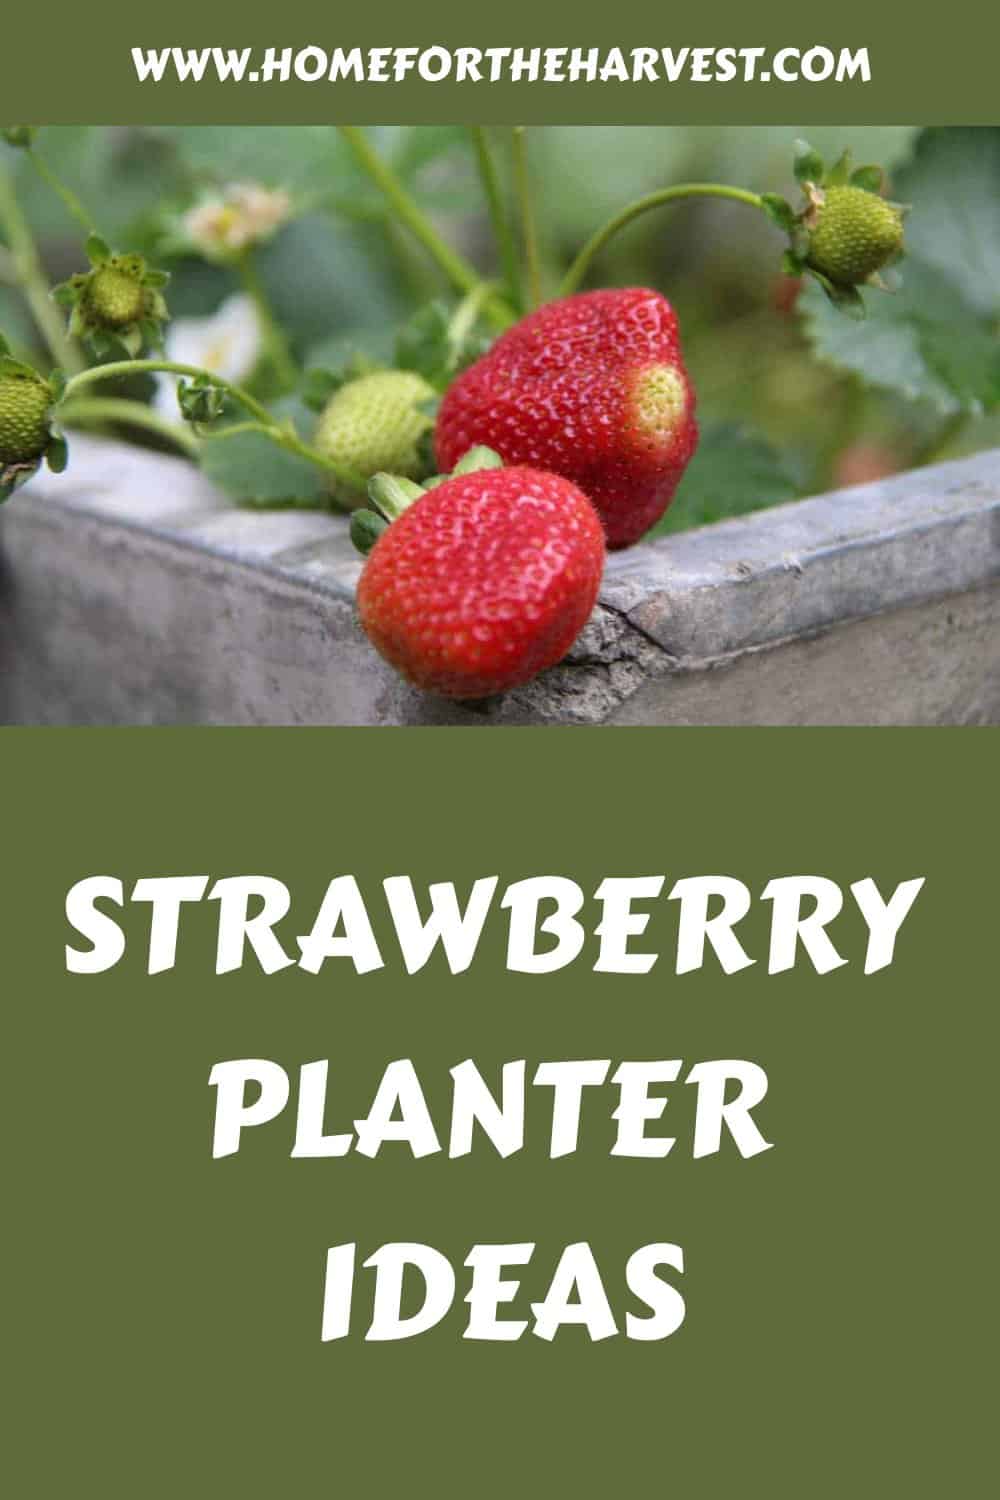 Strawberry planter ideas generated pin 11383